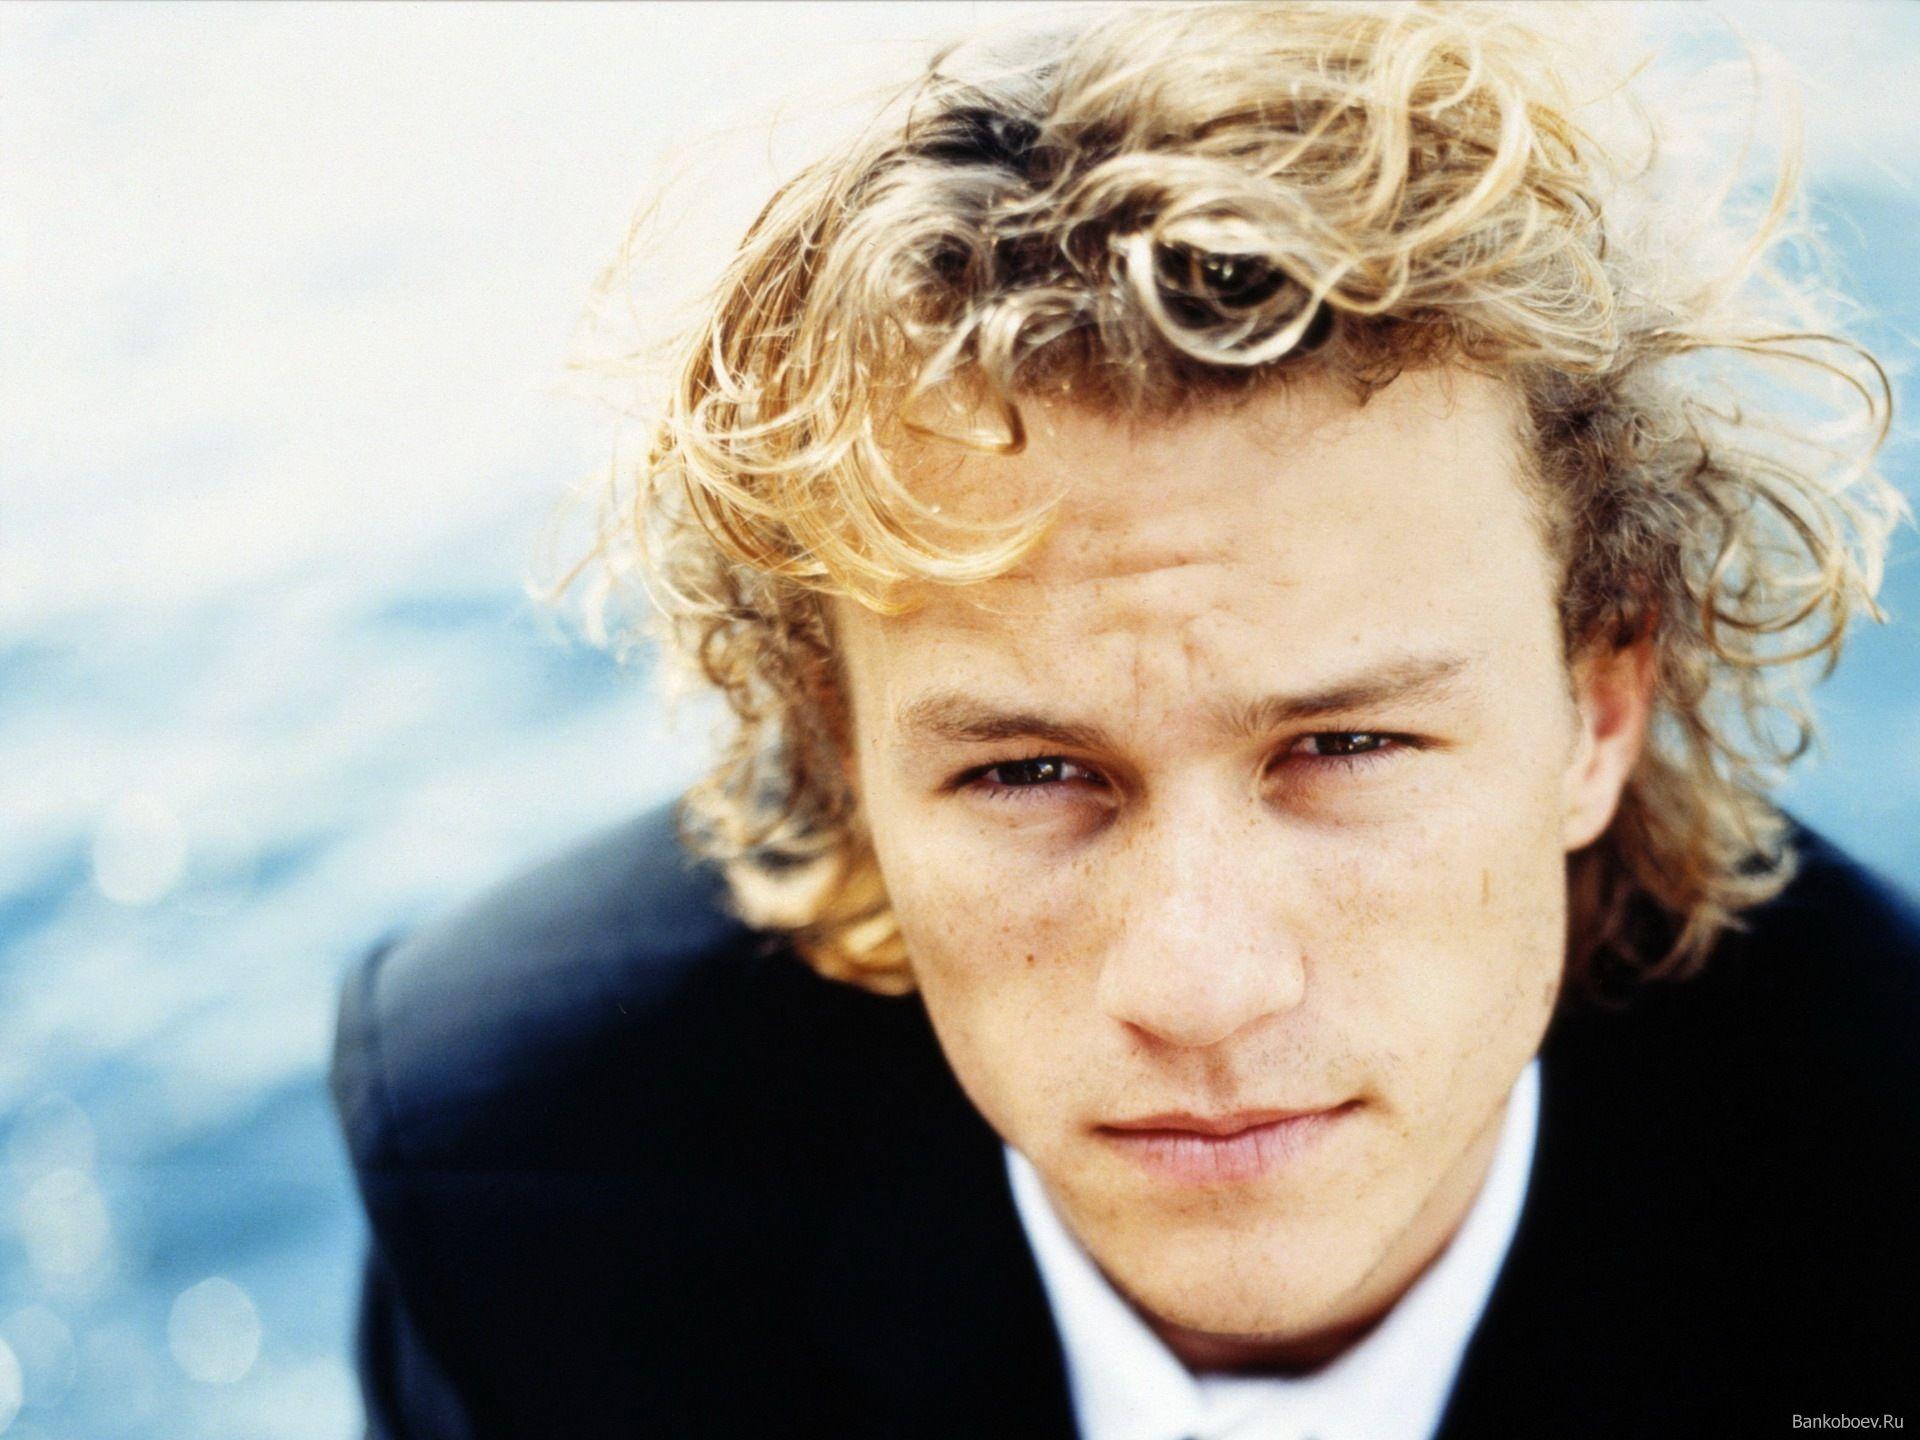 Heath Ledger Biography, Upcoming Movies, Filmography, Photo